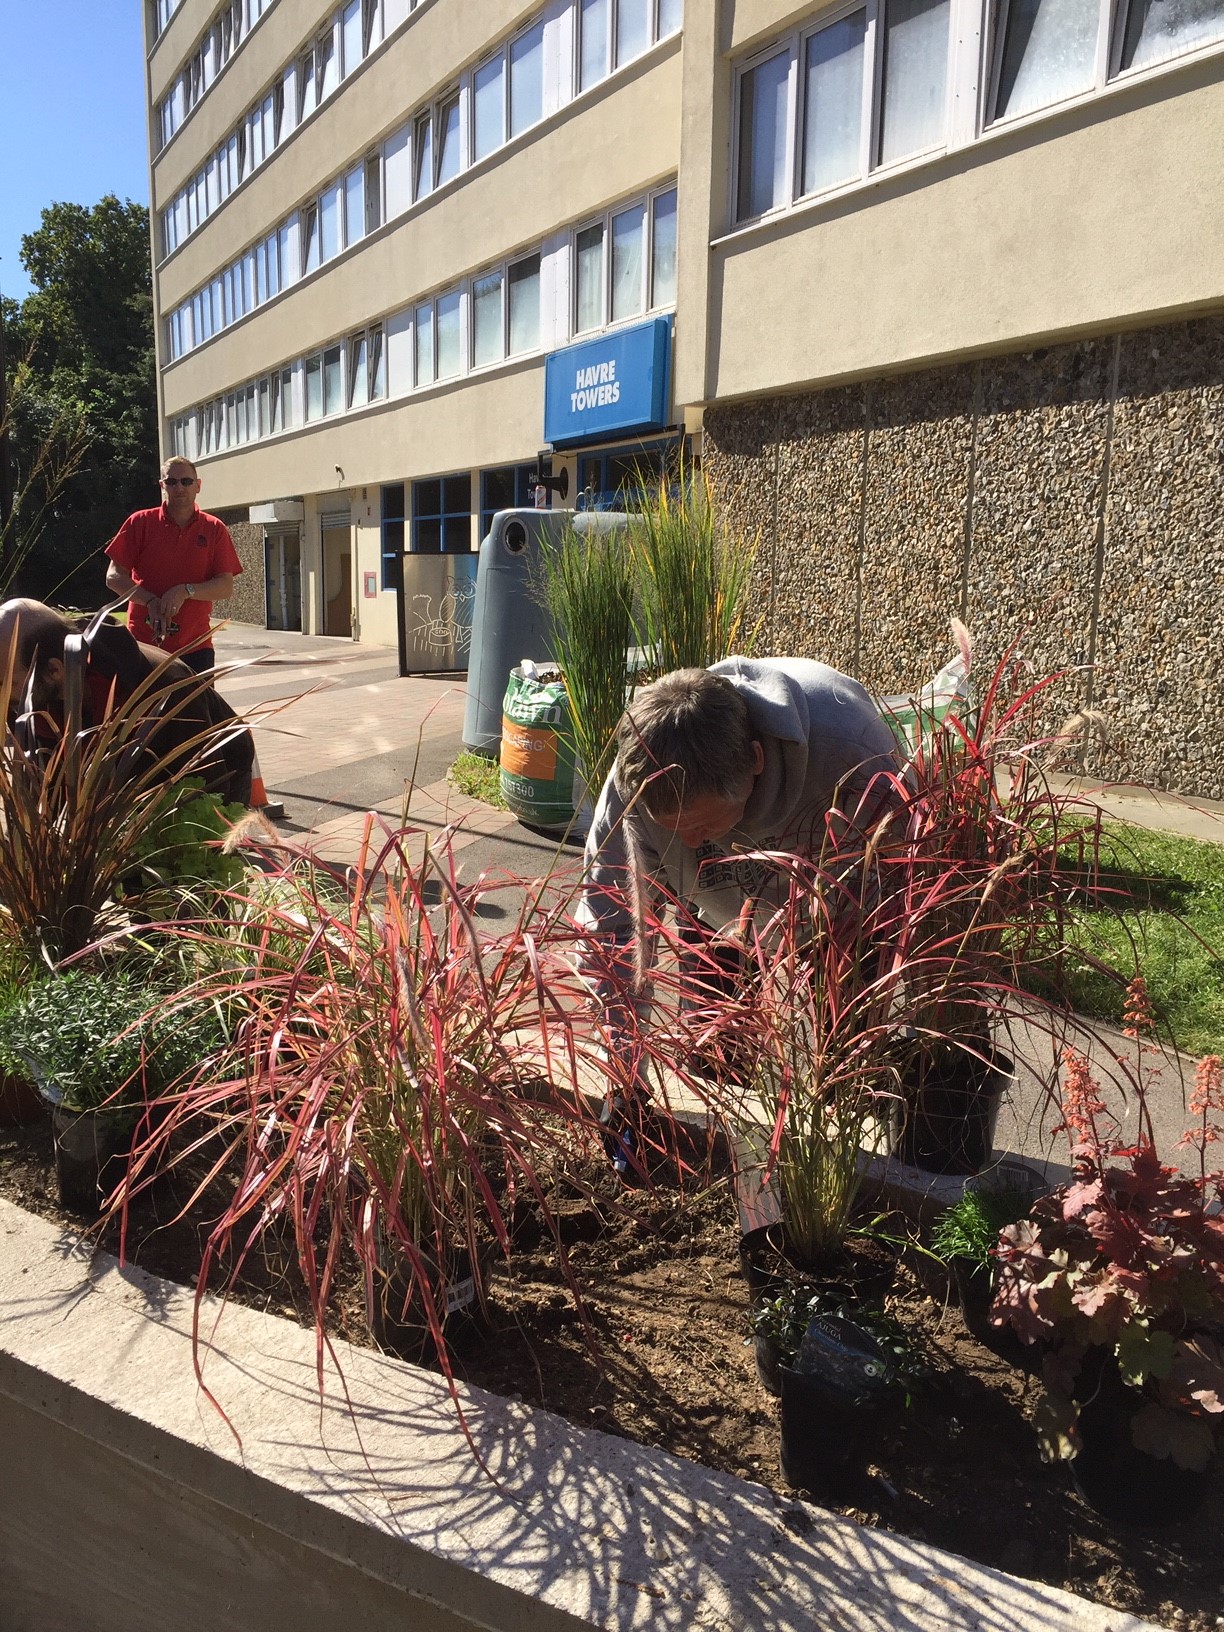 Residents transform tower blocks for ‘Plants for People’ project